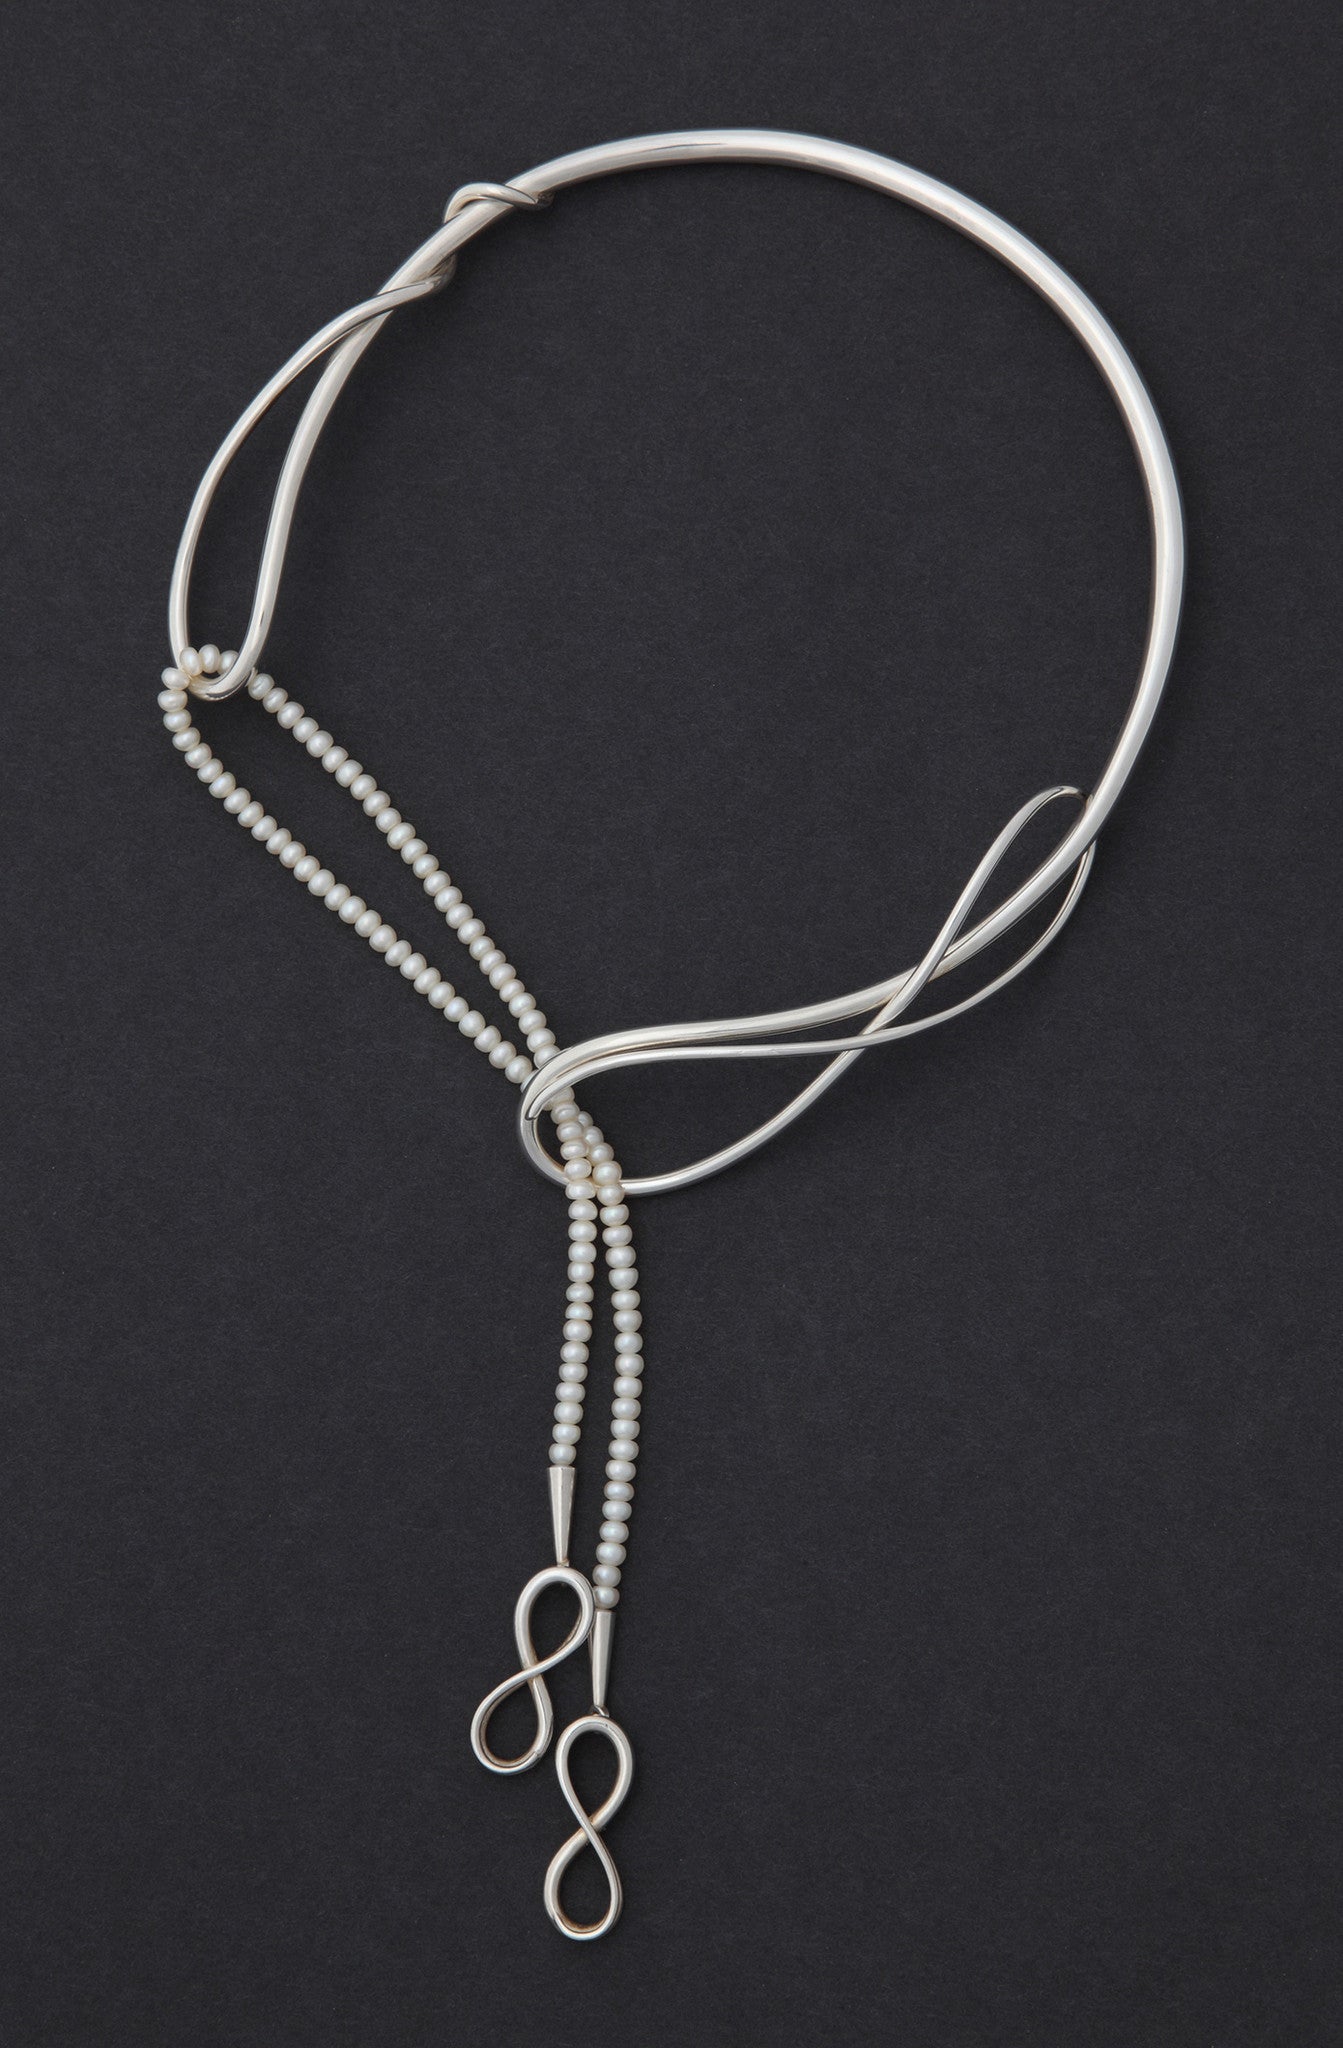 Tendrils Torque with Pearls neck ring necklace